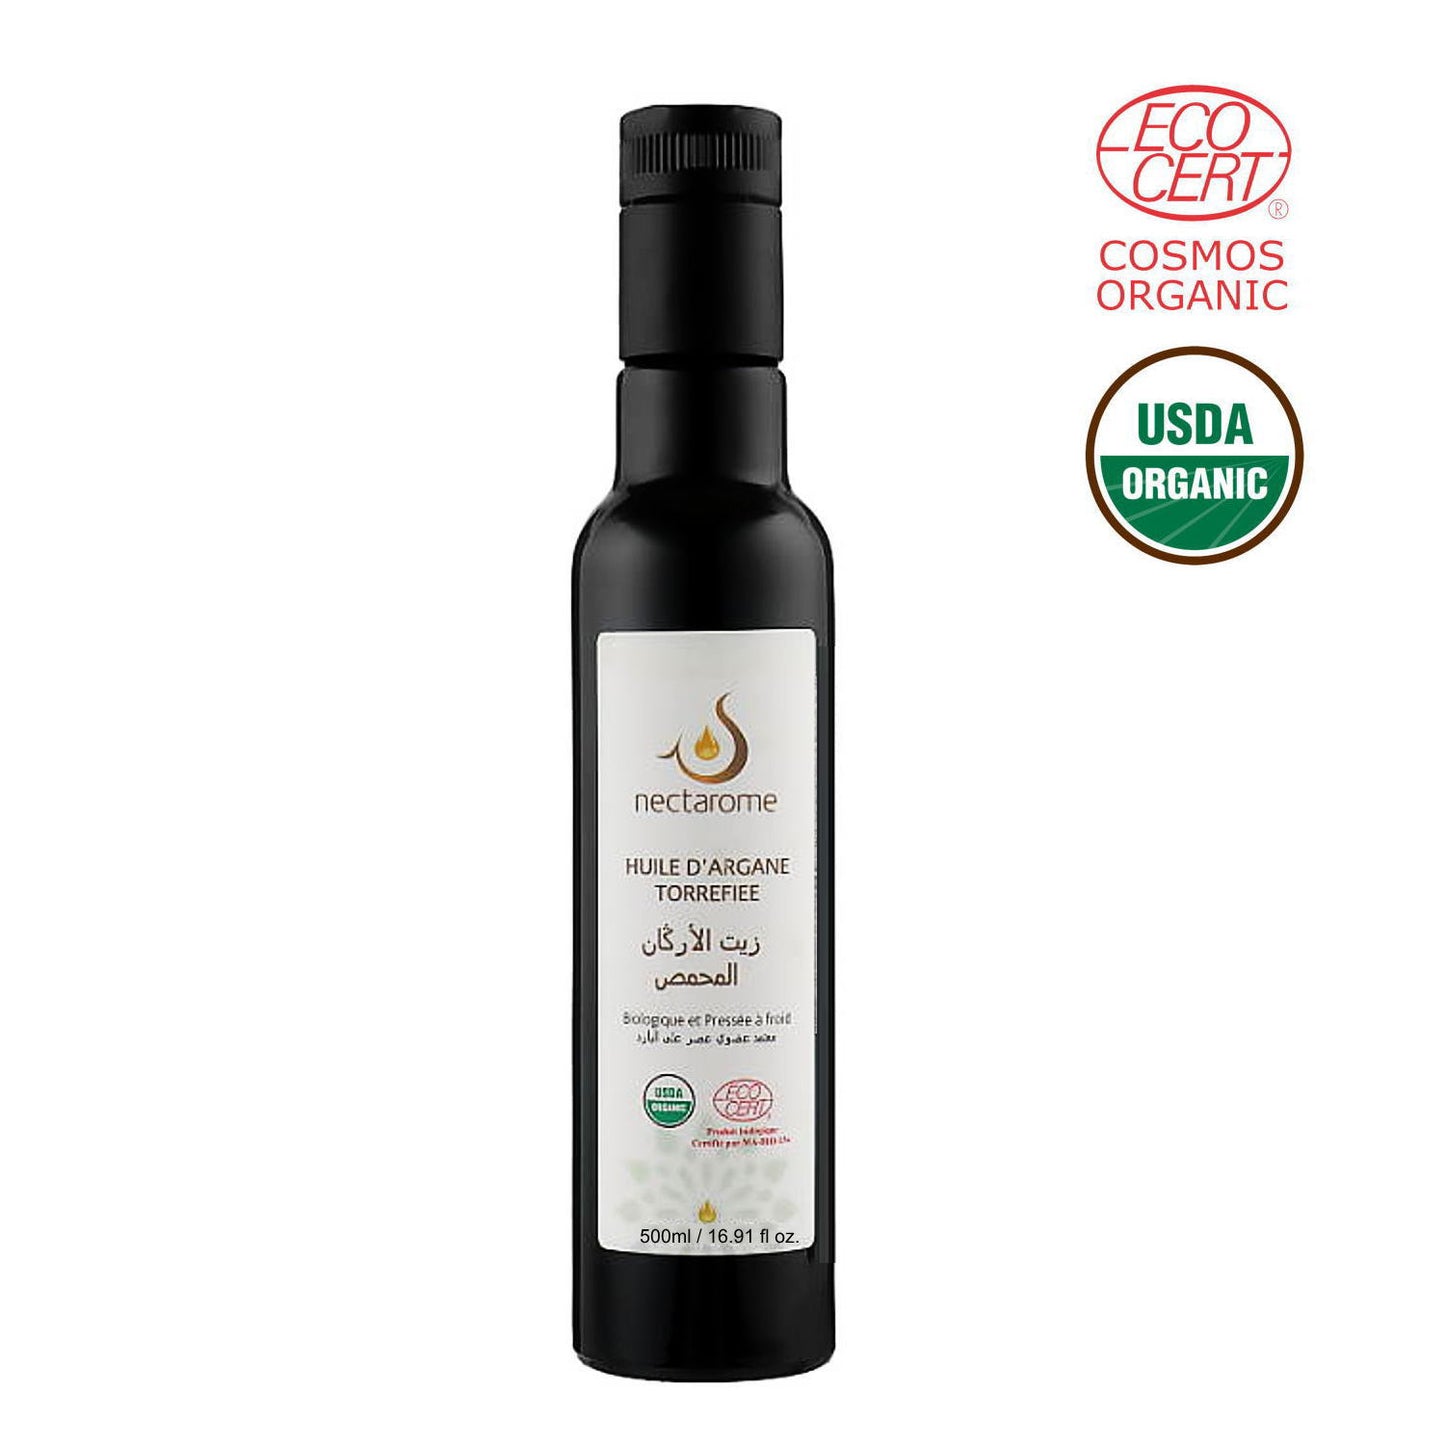 [Shipped after November 16th] NECTAROME Organic [Edible] Argan oil (Organic certified by Ecocert/USDA) 500ml 